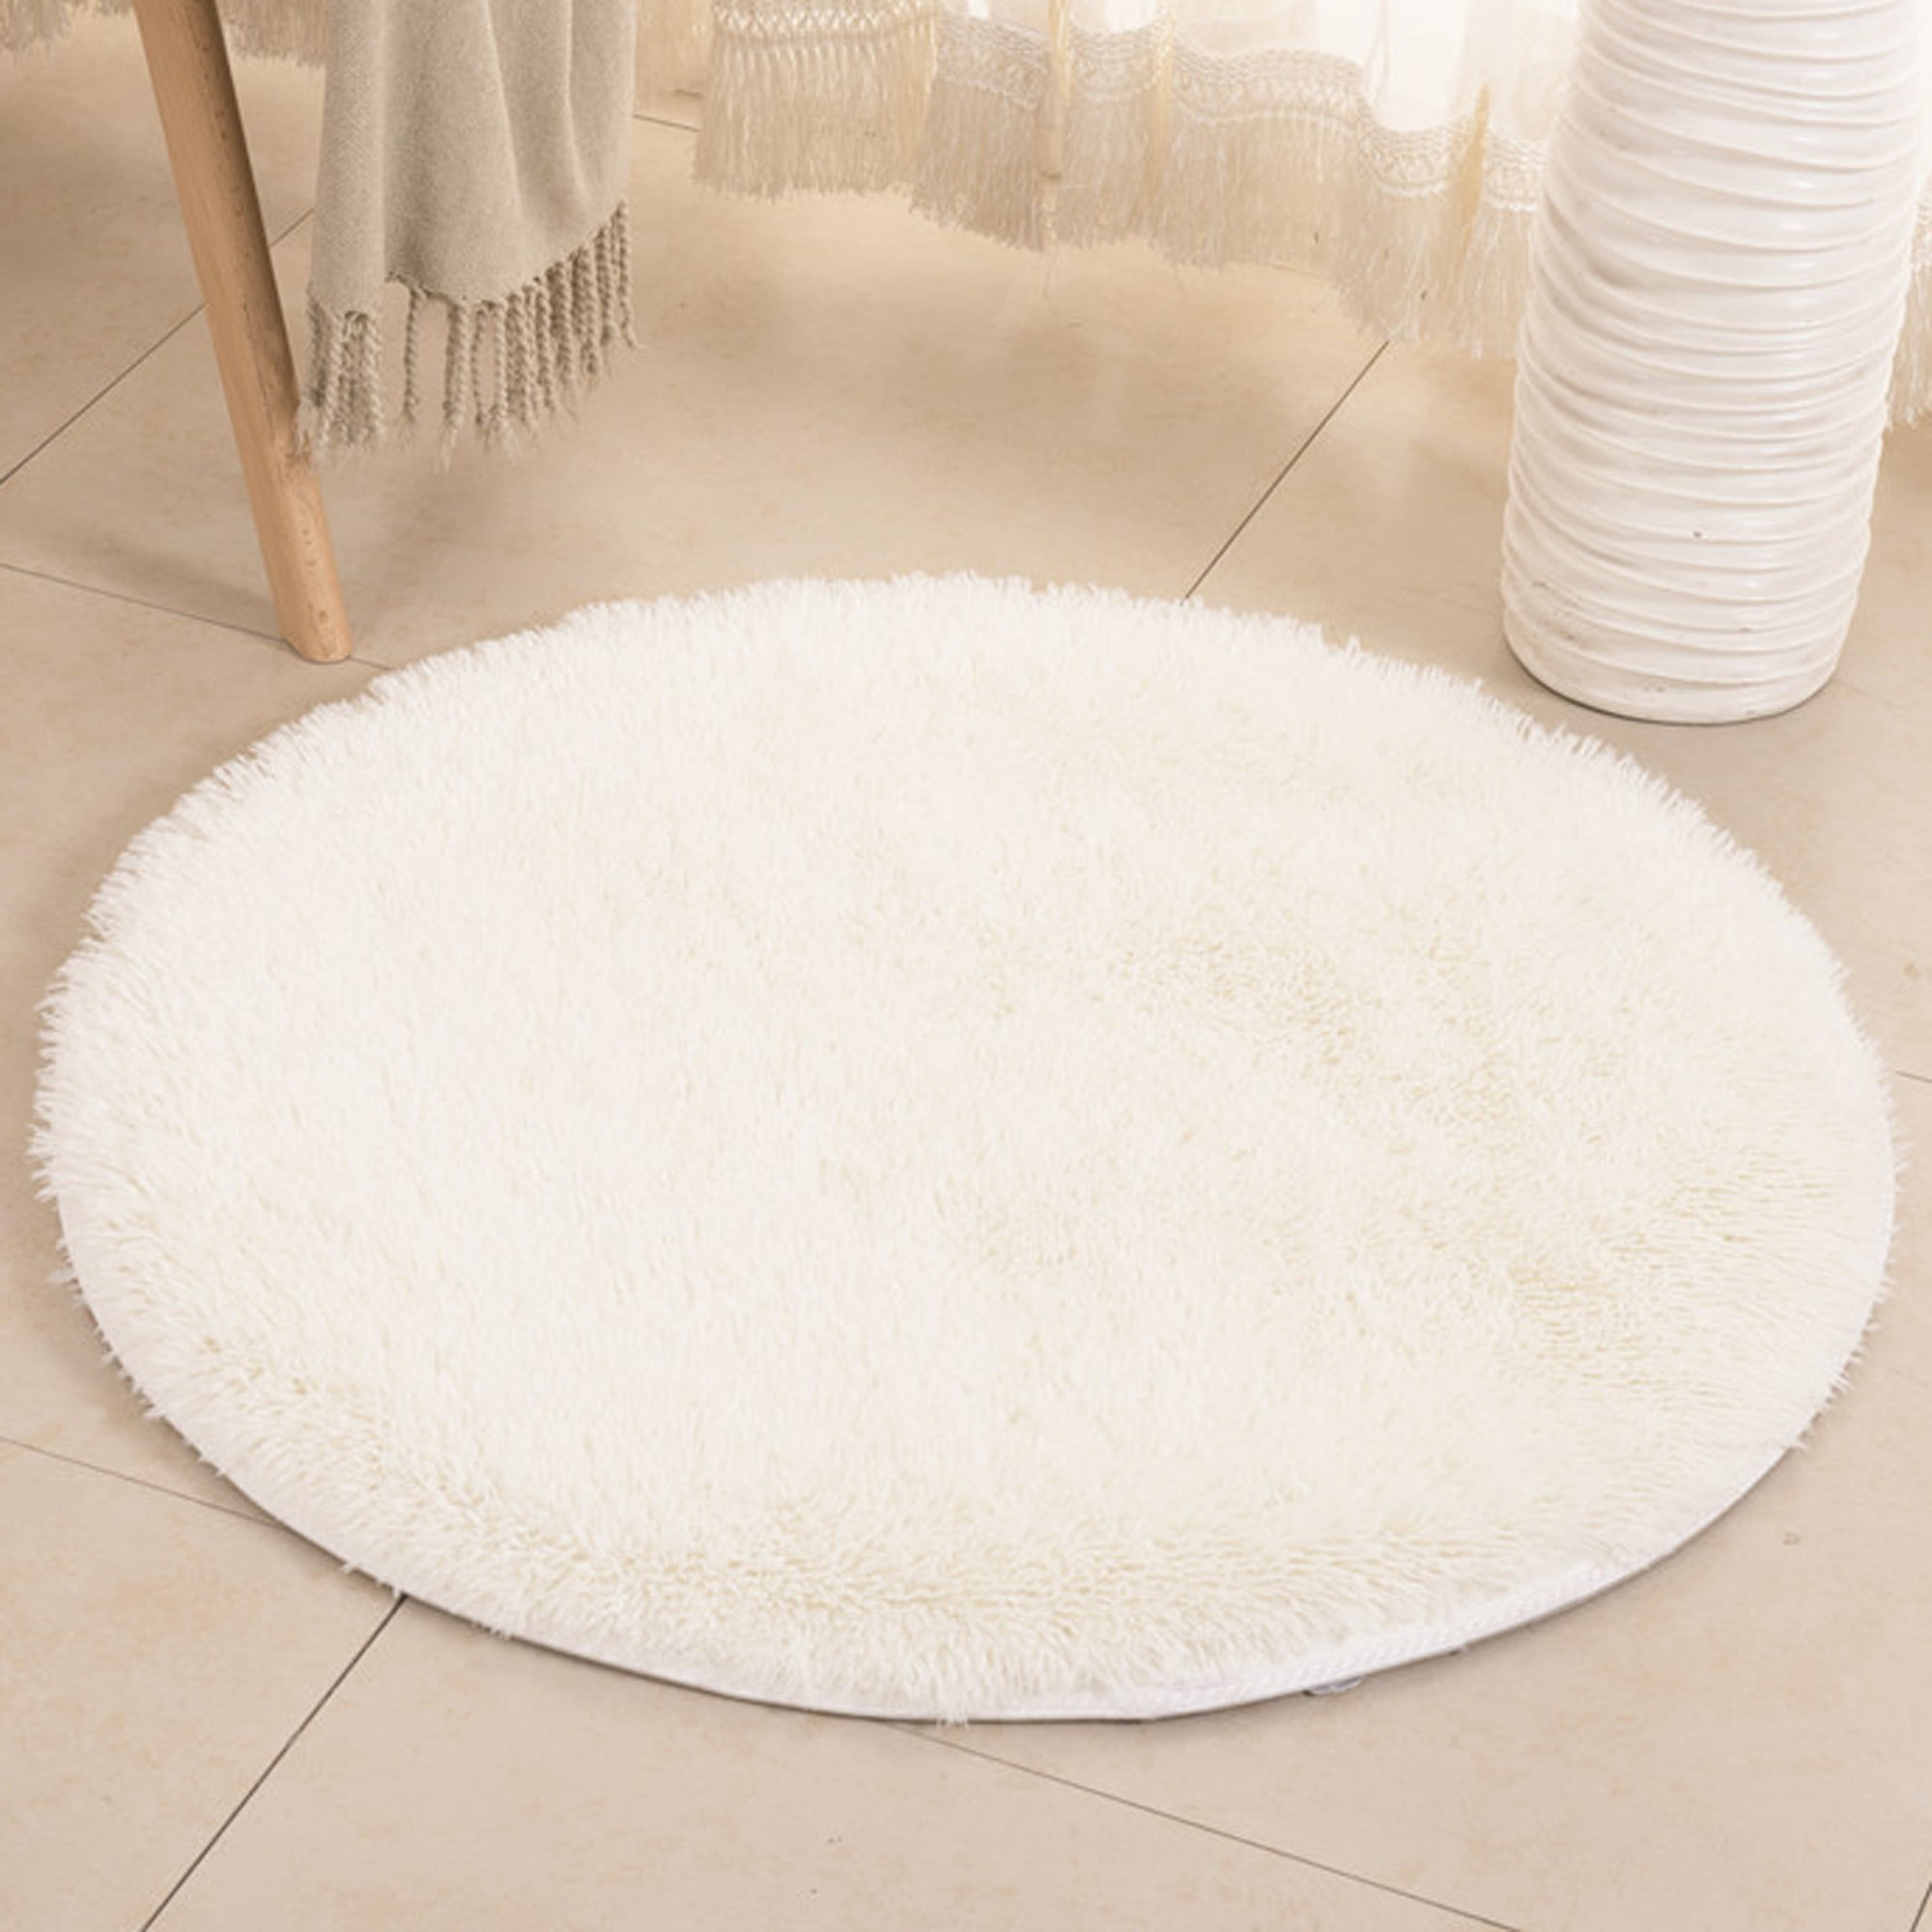 American Cool Skull Non-Slip Circular Area Rugs Kitchen Floor Mat Washable Floor Carpet for High Chair Bedroom Living Room Study Playing Round Area Rug 3 Feet 